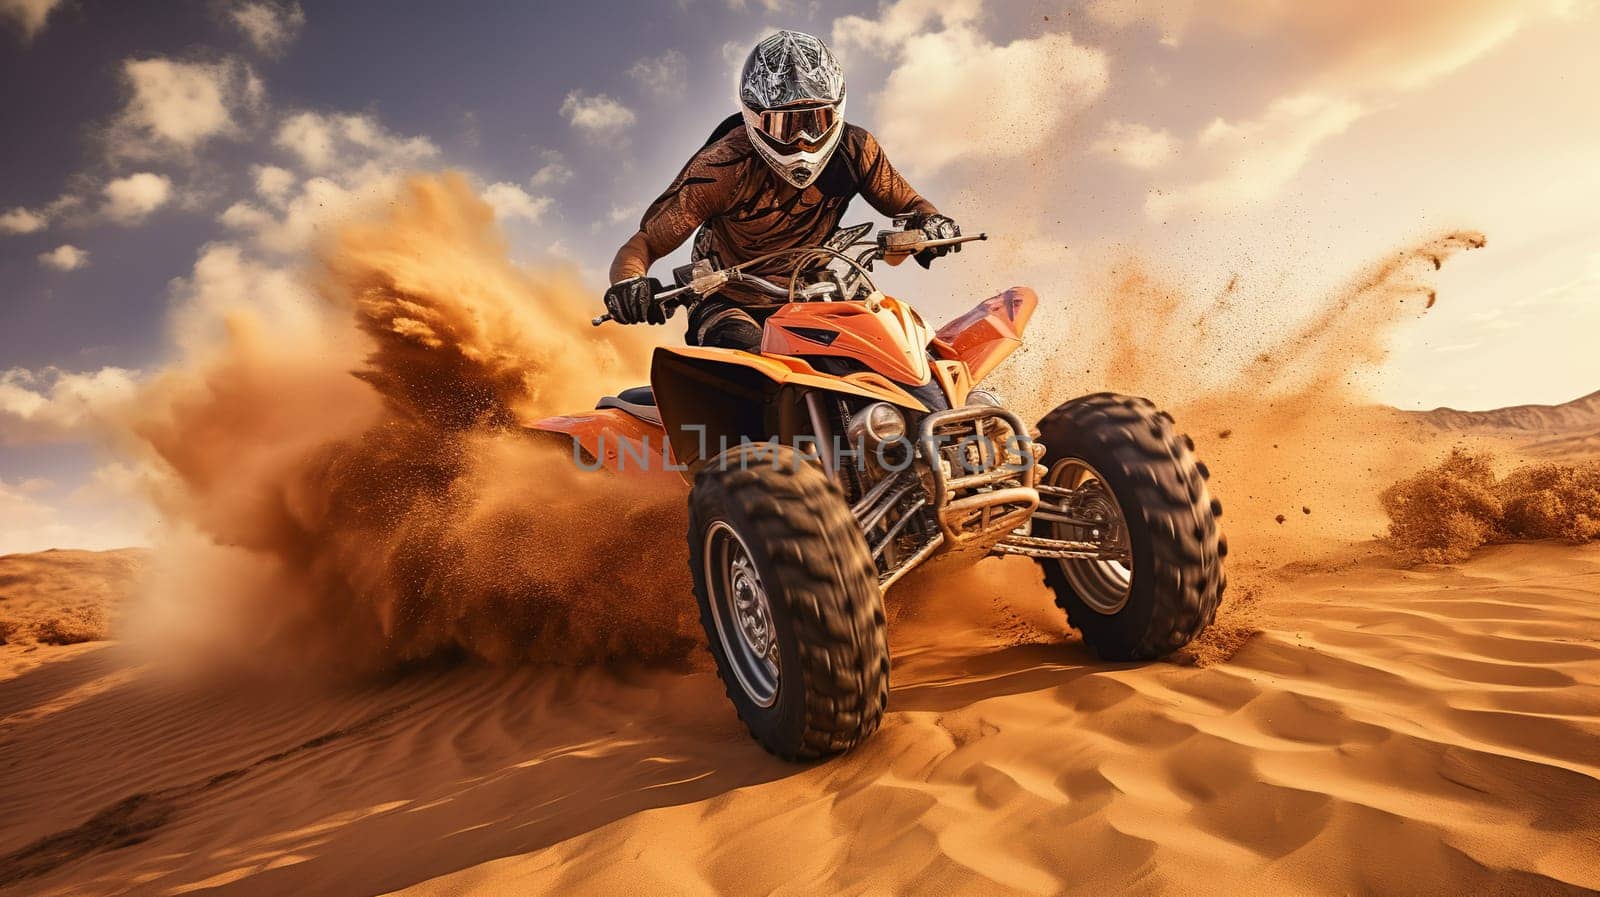 Competitive quad biker kicking up a plume of sand while racing over a sand dune Generate AI by Mrsongrphc